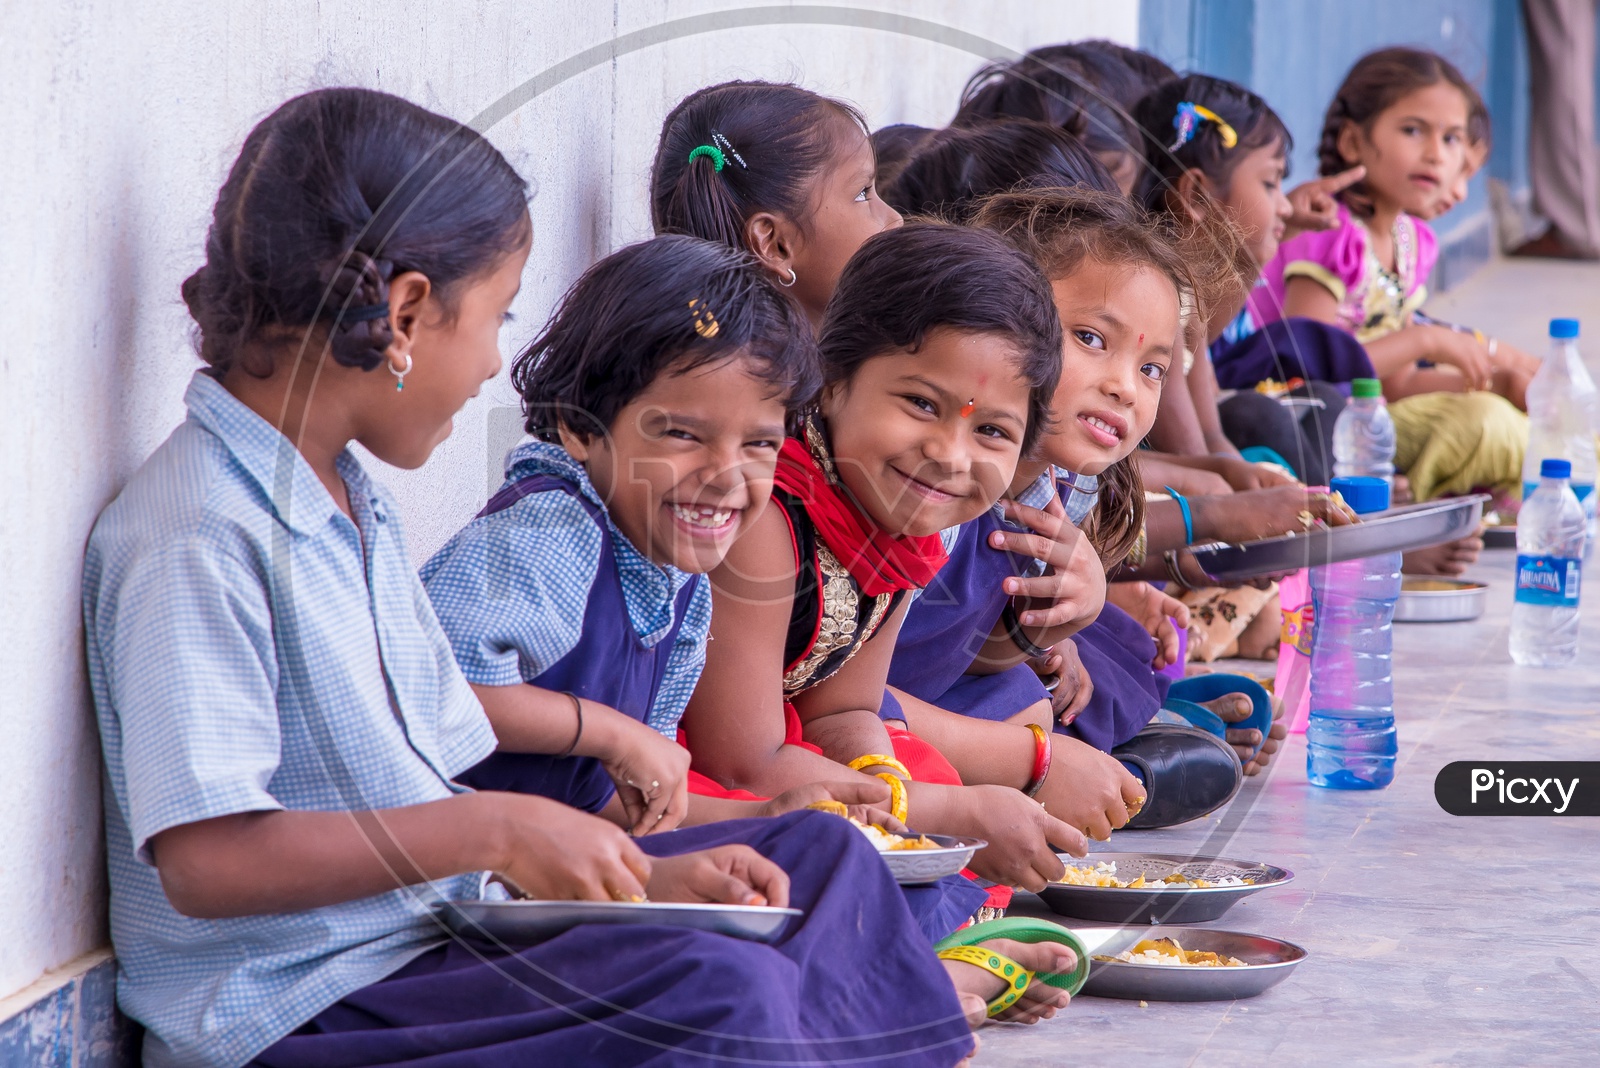 Kids served Mid Day meal at a Govt. School in Telangana